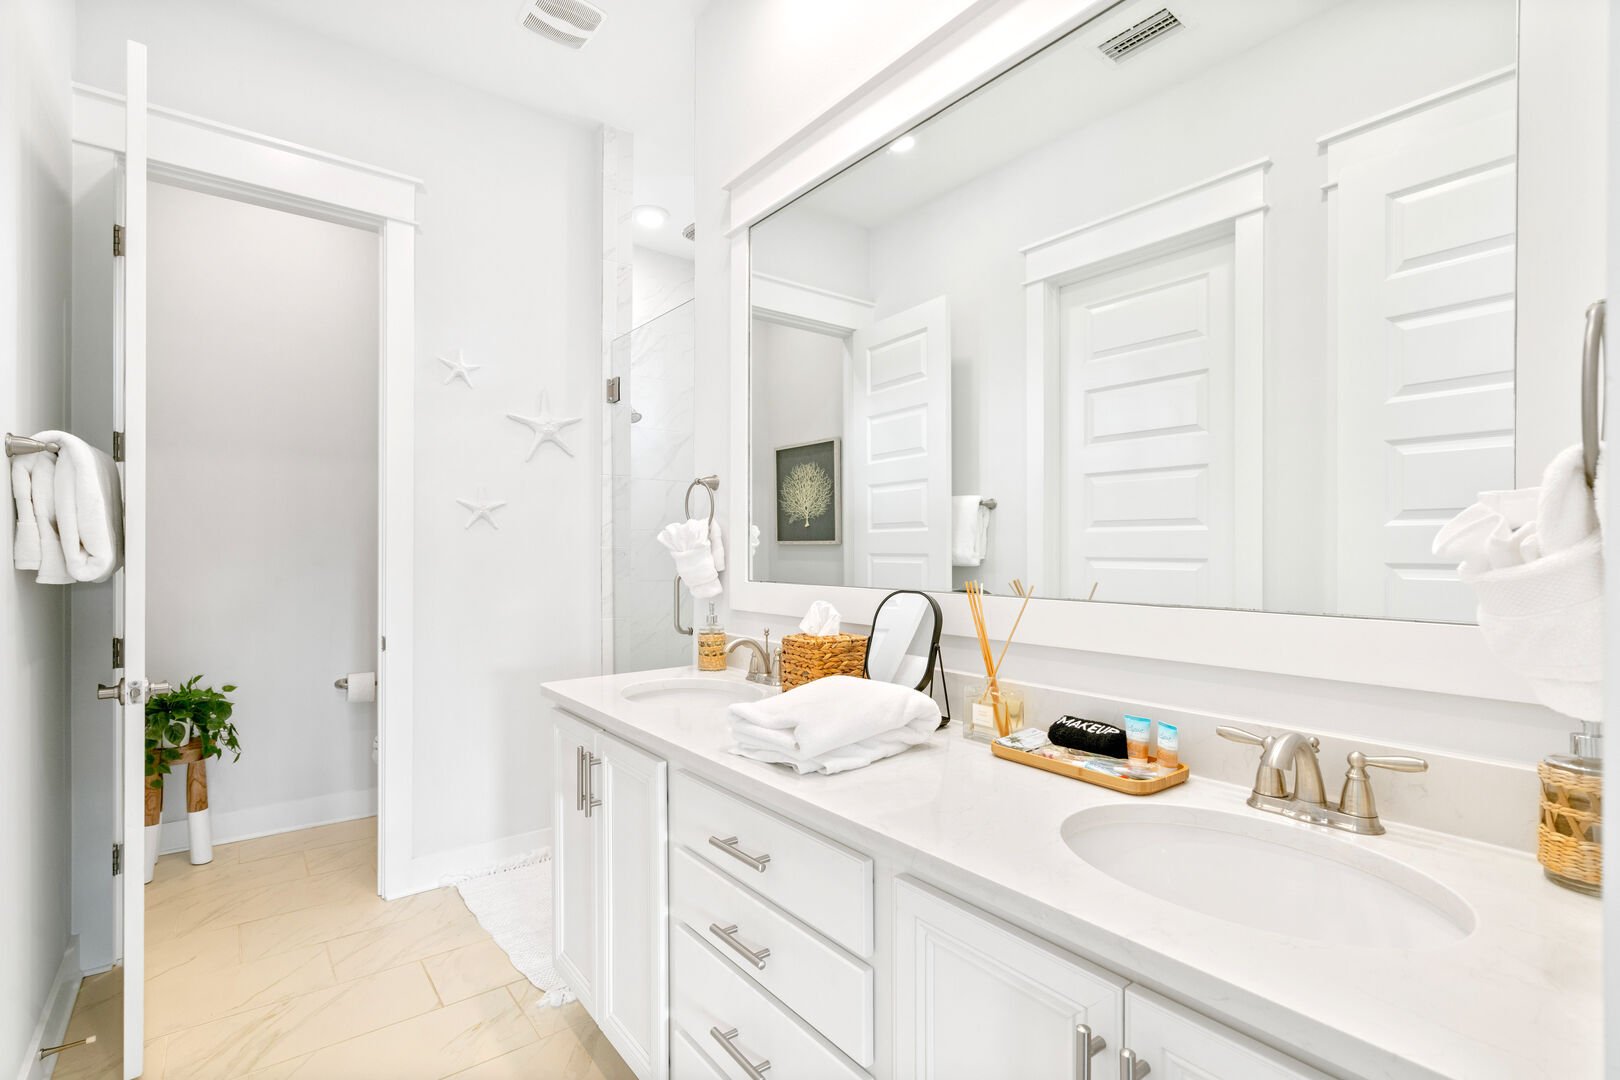 Primary bathroom comes equipped with dual vanities, walk-in closet, and large rainfall shower.